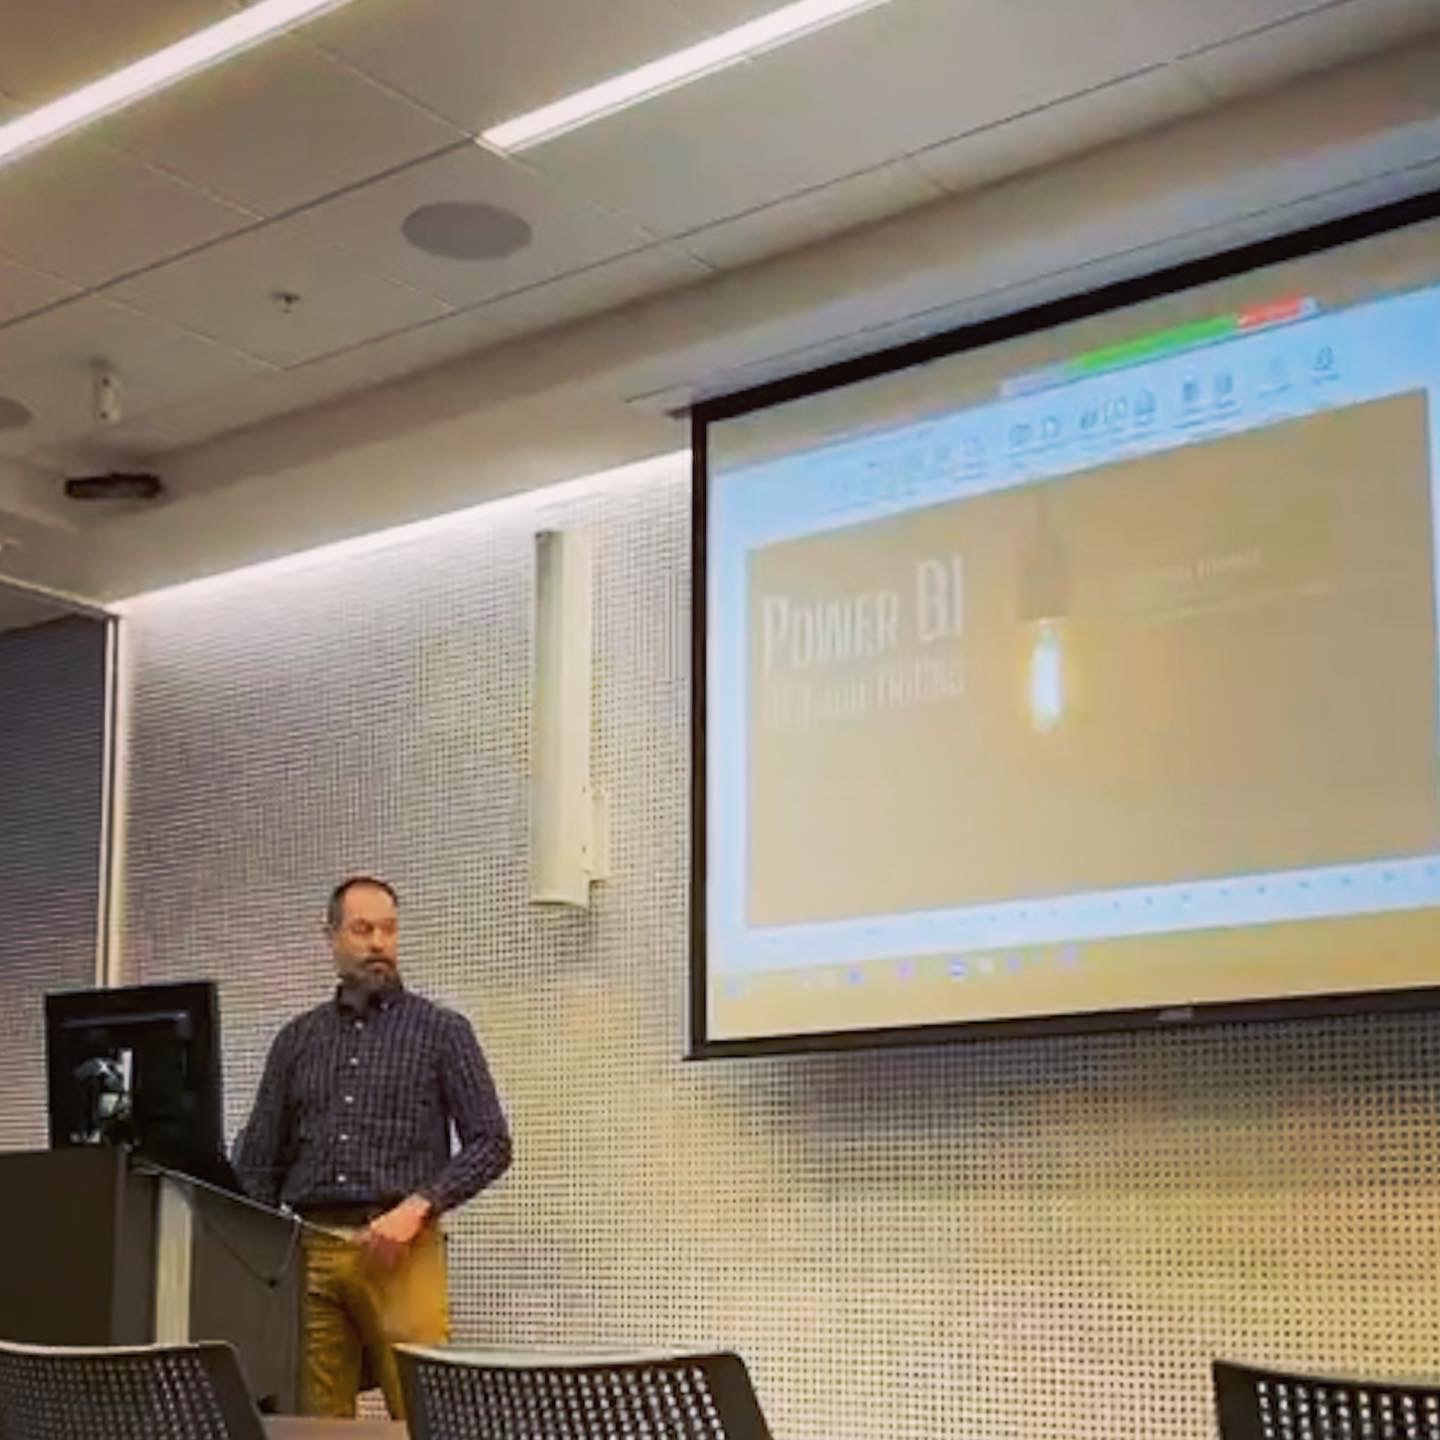 You are currently viewing Nashville Modern Excel and Power BI User Group